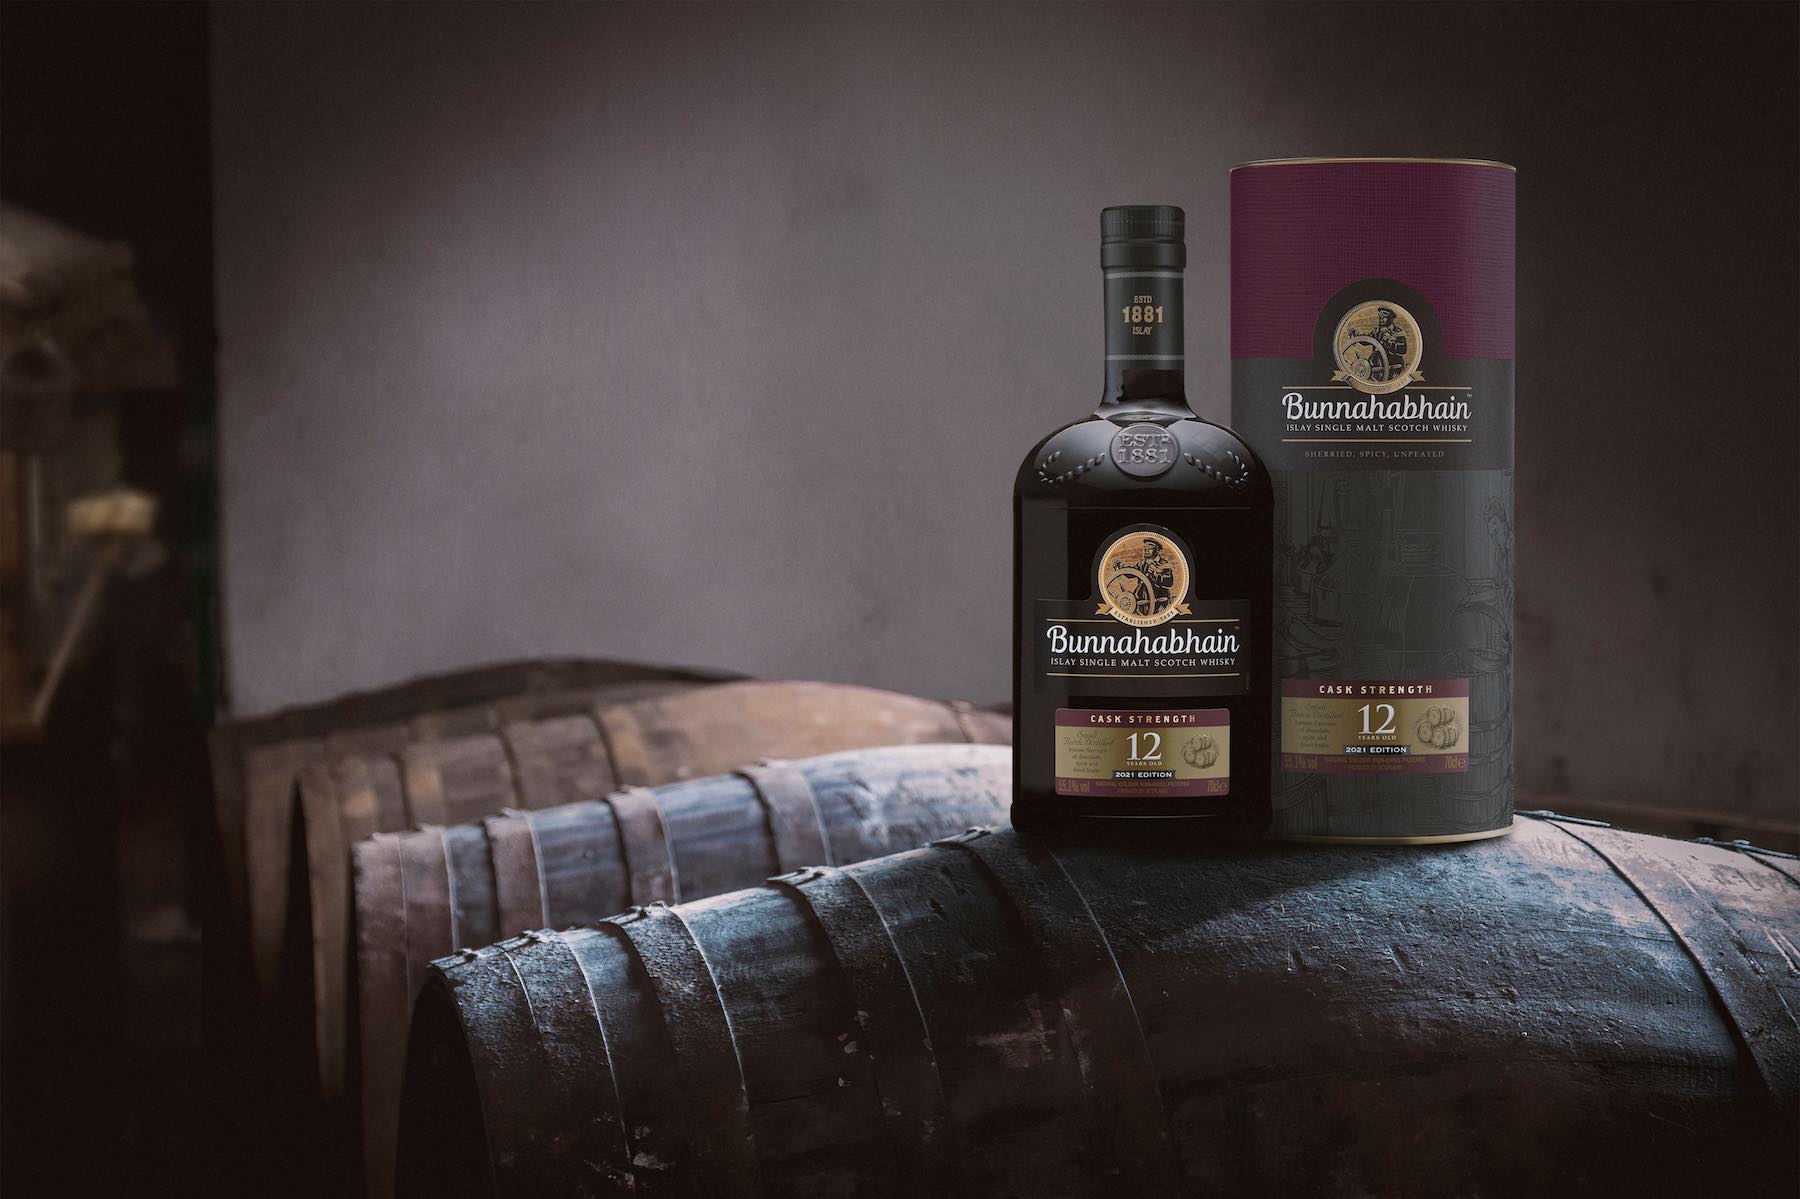 Bunnahabhain launches Cask Strength 12 Year Old whisky inspired by Warehouse 9